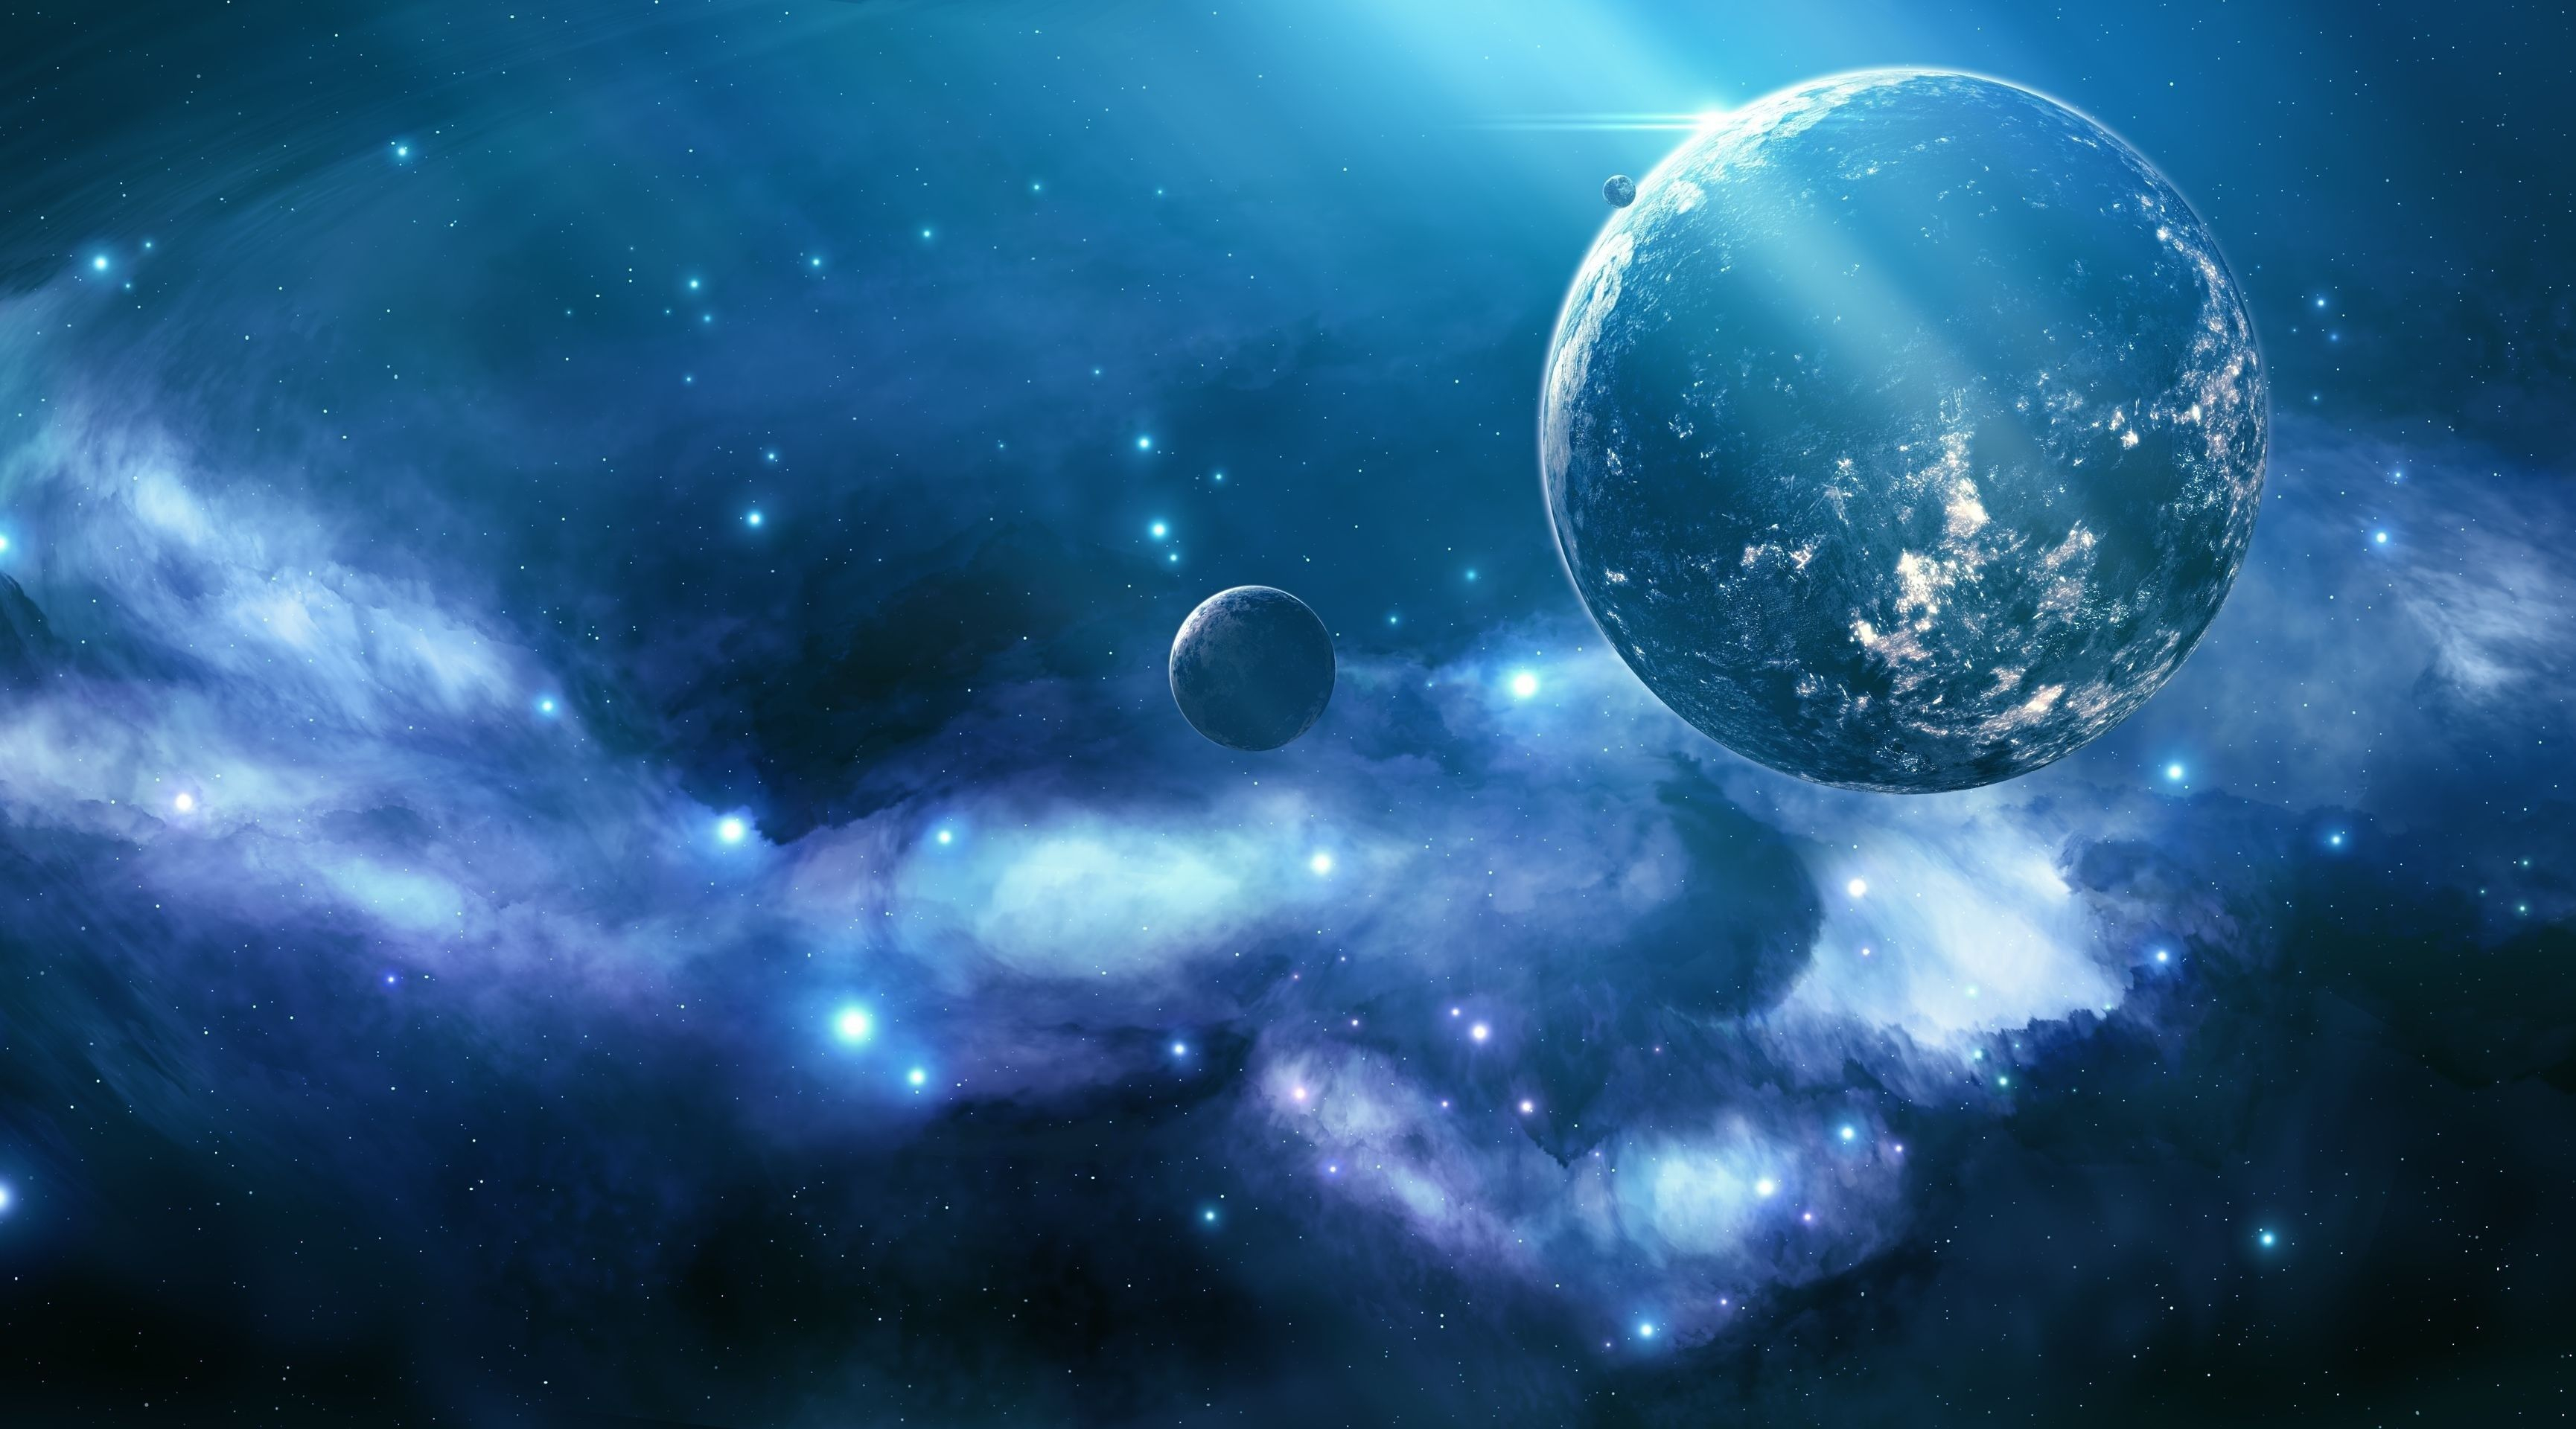 3460x1920 Blue Sci-Fi Wallpapers Top Free Blue Sci-Fi Backgrounds